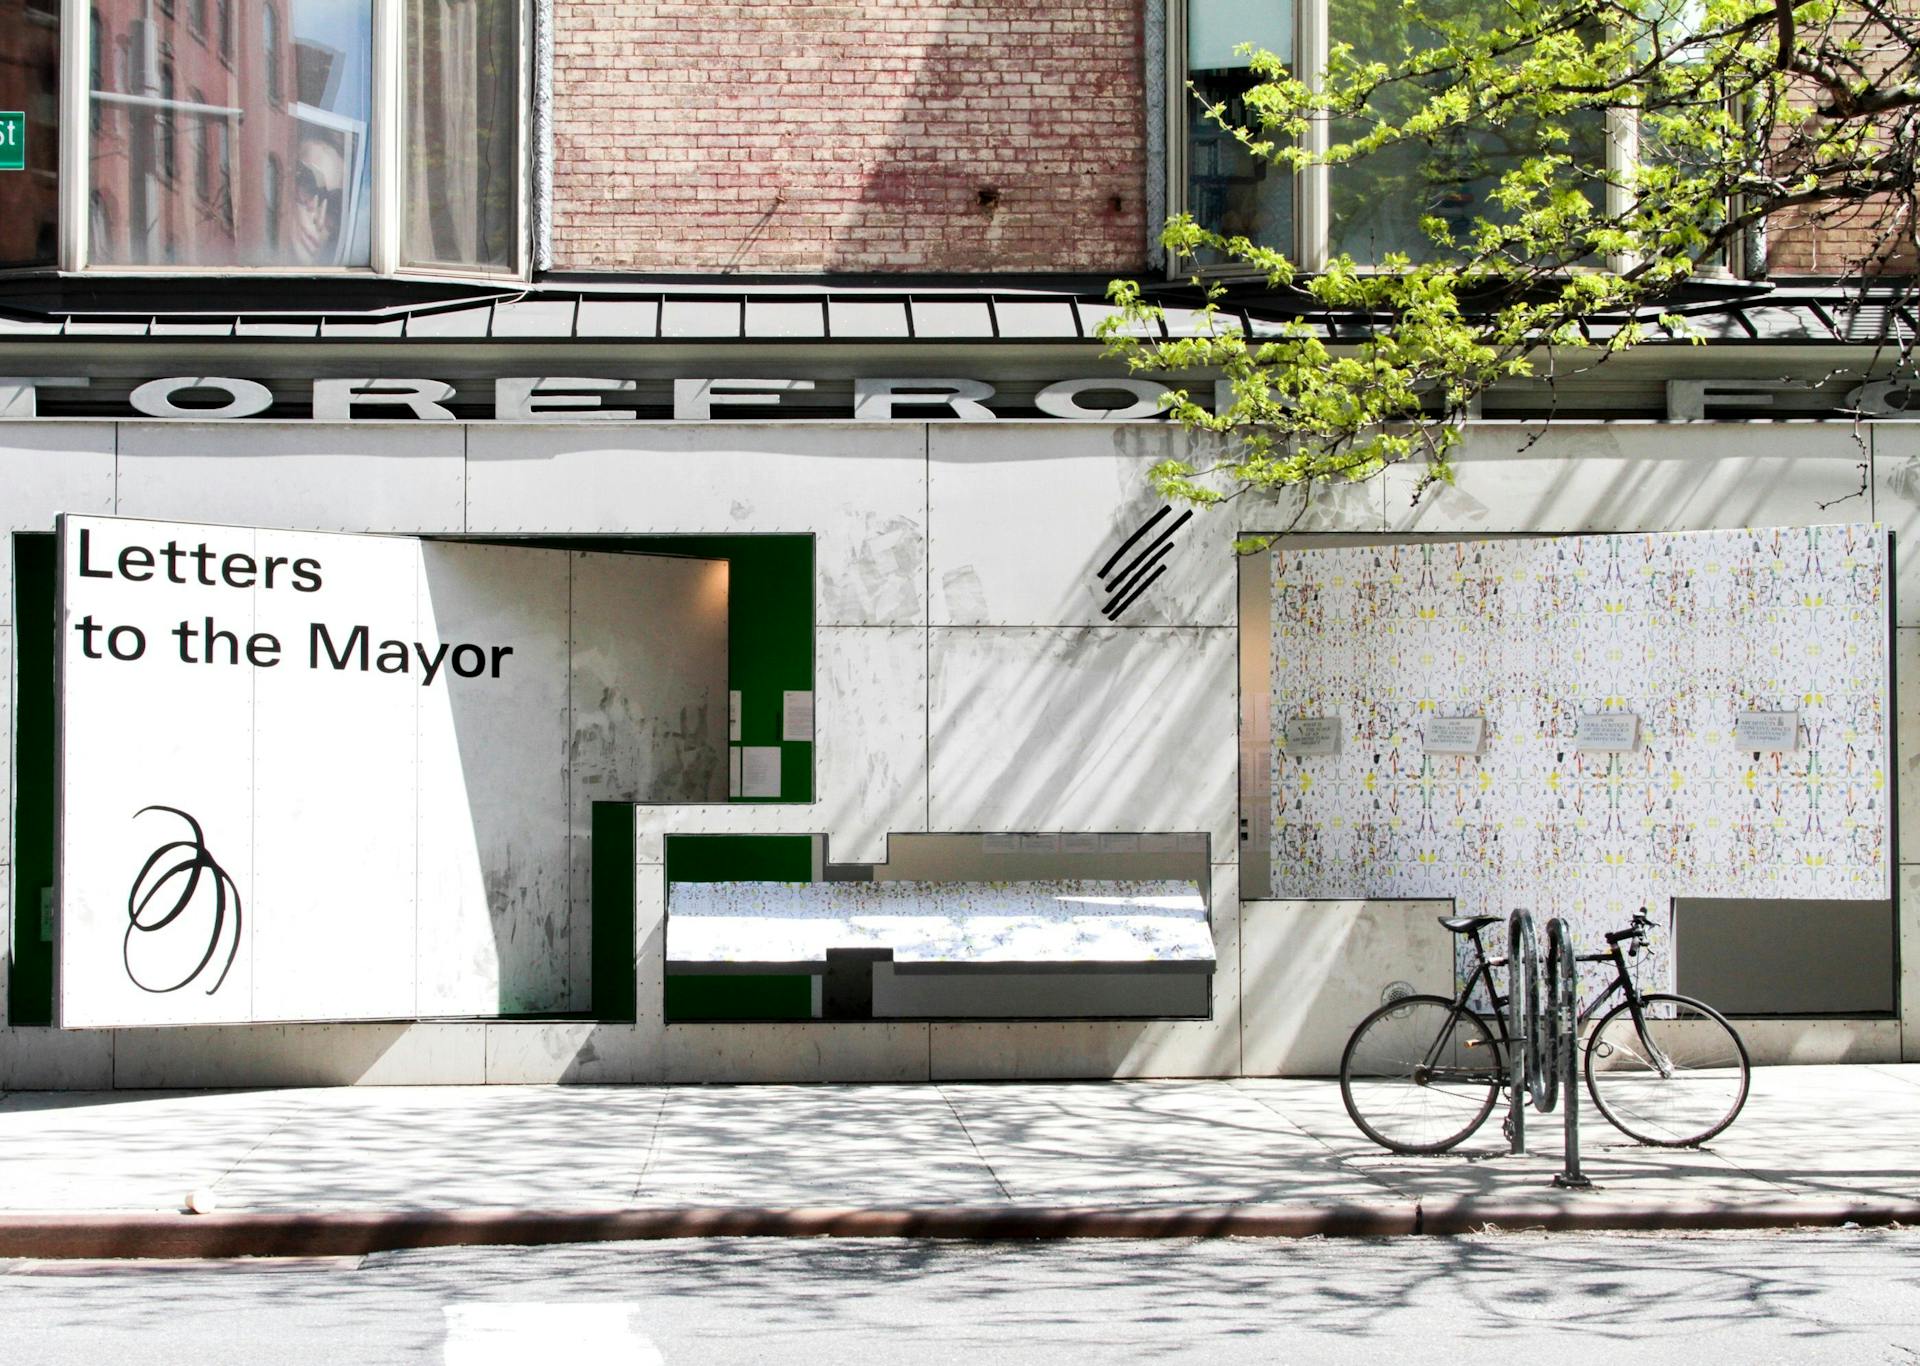 Letters to the Mayor, 2014, New York 